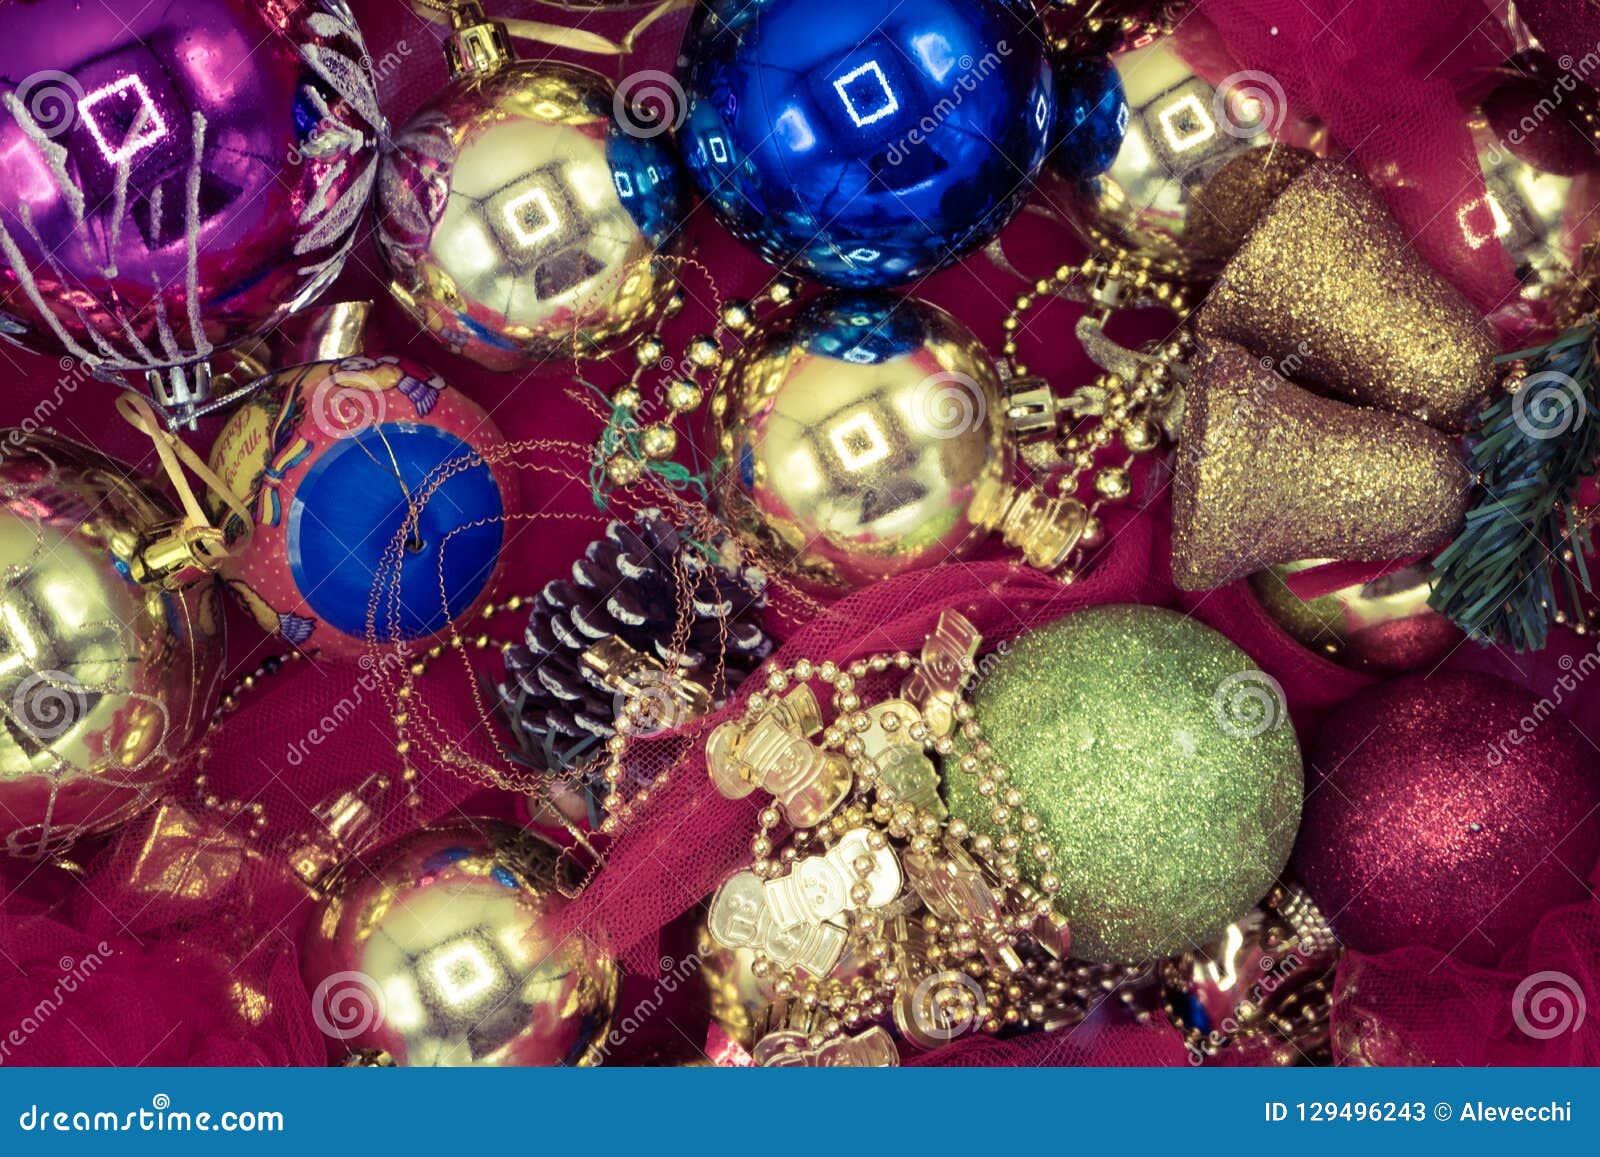 Close-up of Christmas Colorful Decorations. Stock Image - Image of ball ...